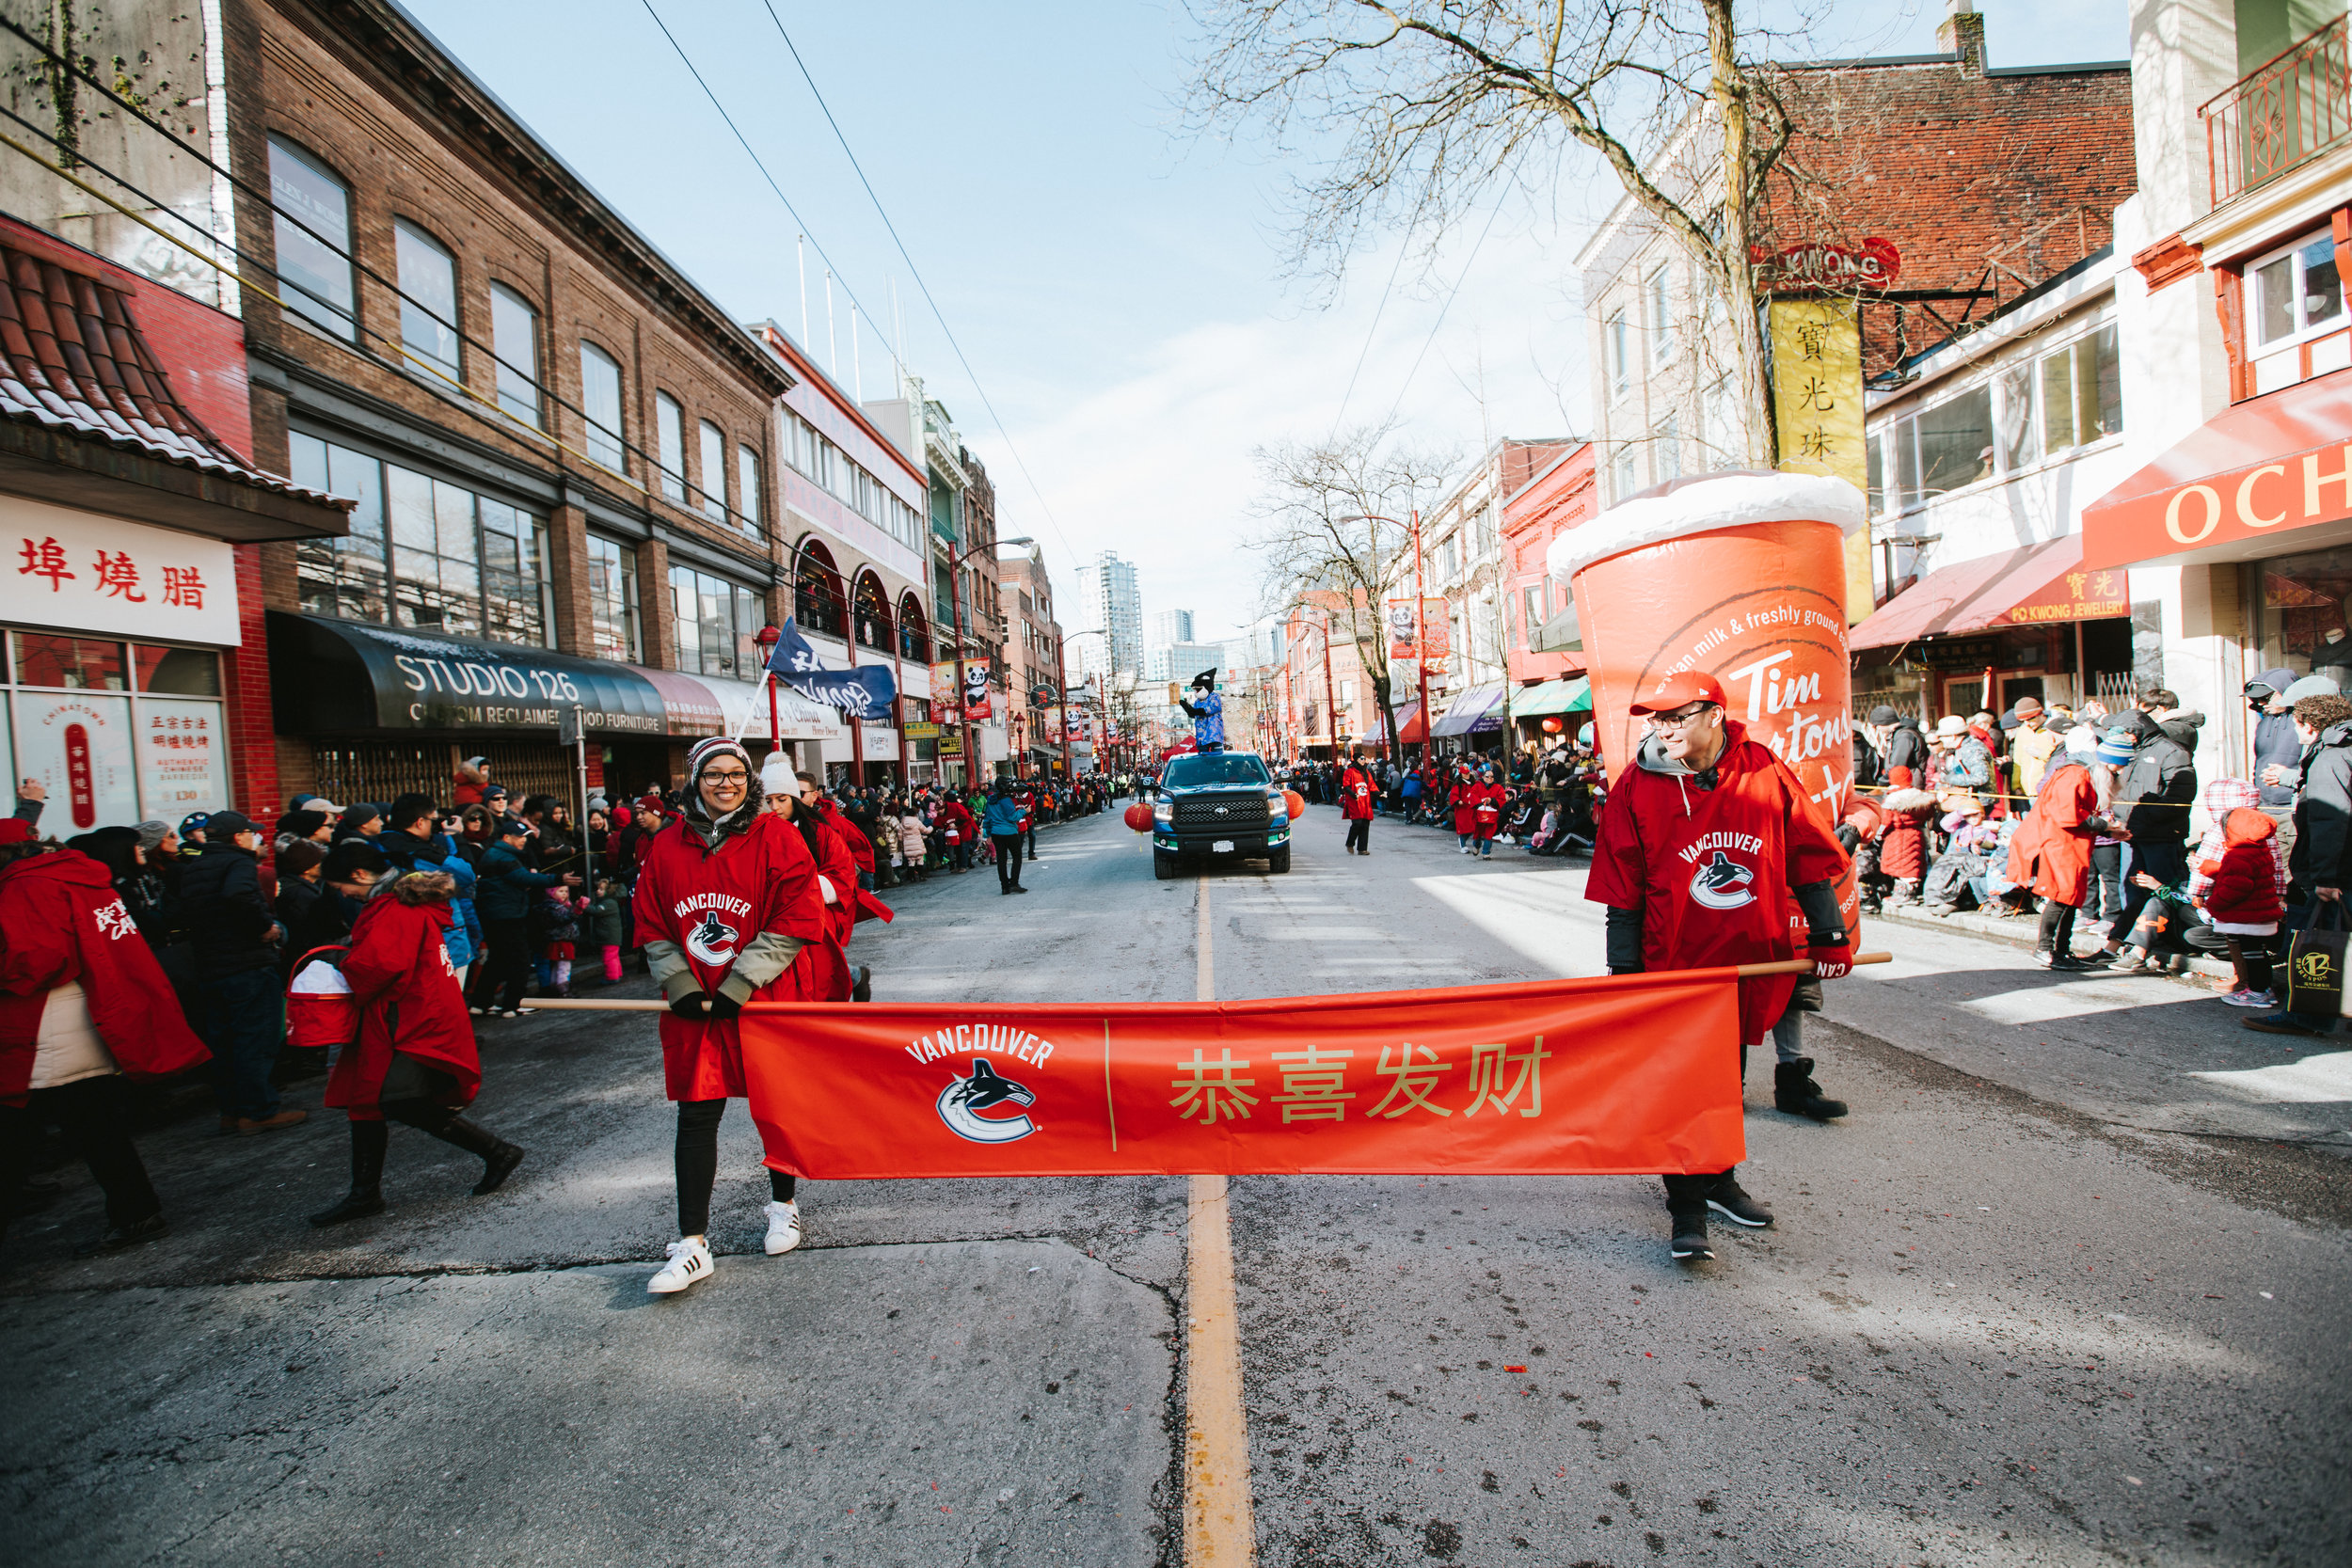 Canucks to celebrate Lunar New Year, Vaisakhi, and other special events